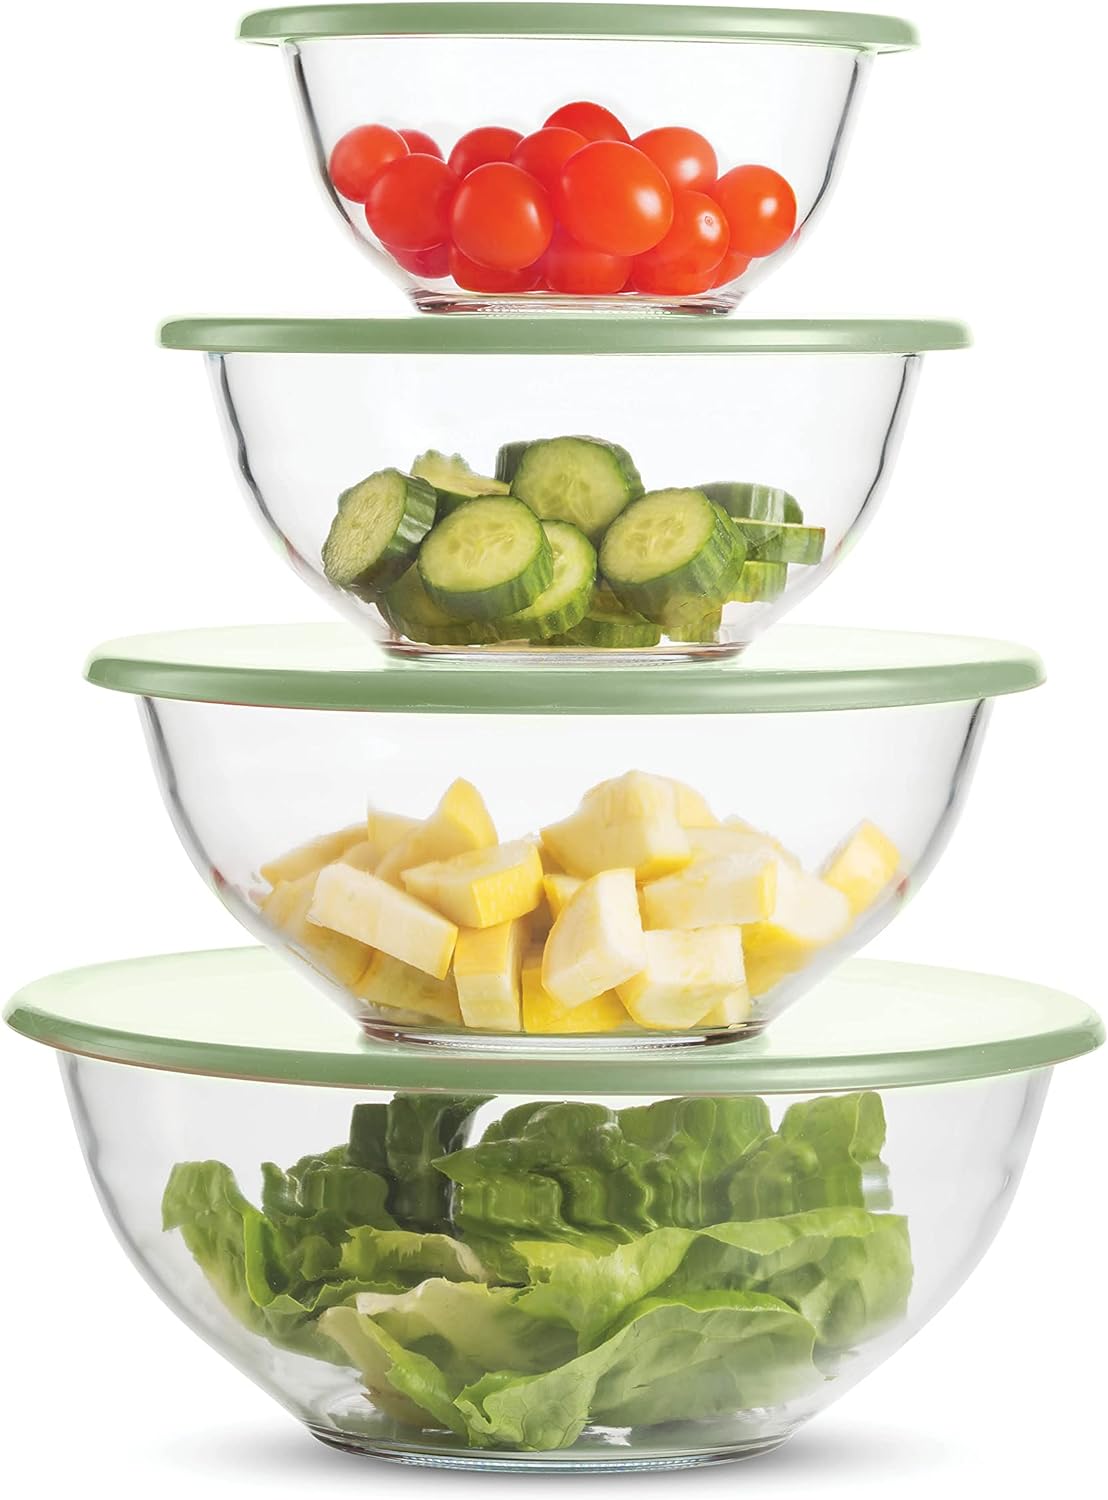 8-Piece BPA-Free Glass Mixing Bowl Set with Lids - Nesting Design, Easy Grip, For Meal Prep & Food Storage